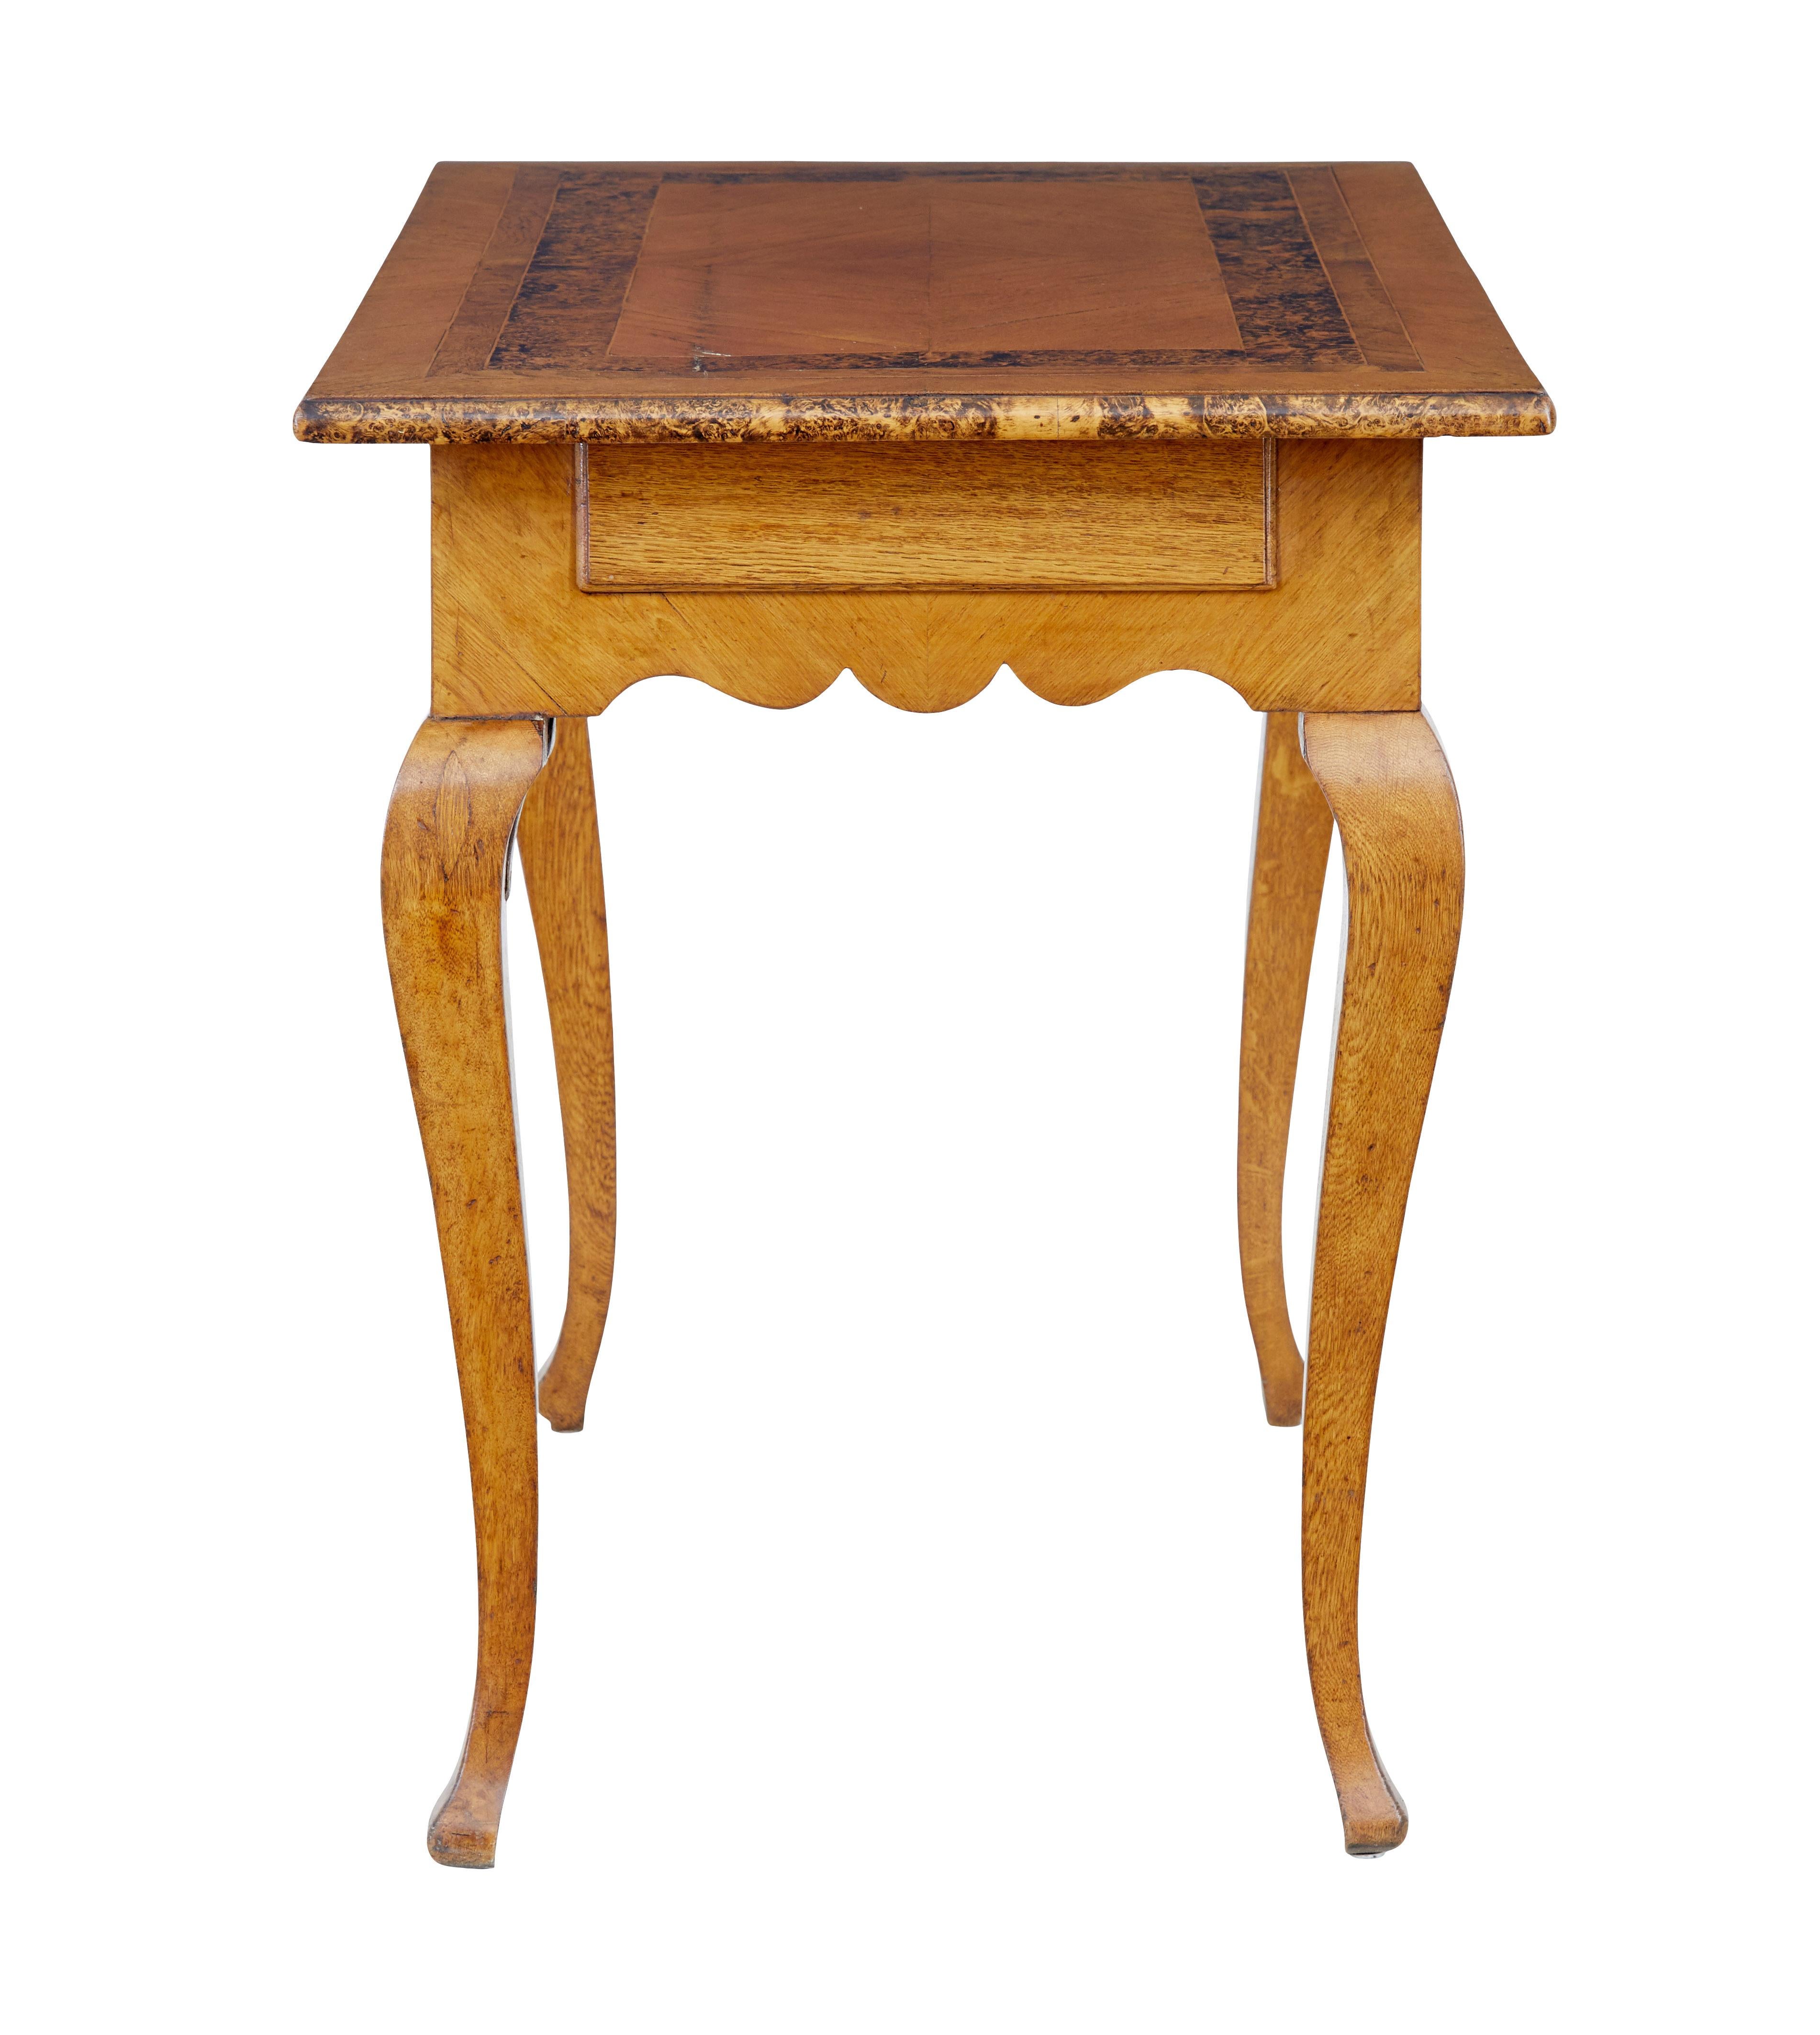 Swedish Mid-19th Century Alder Root Occasional Table In Good Condition For Sale In Debenham, Suffolk